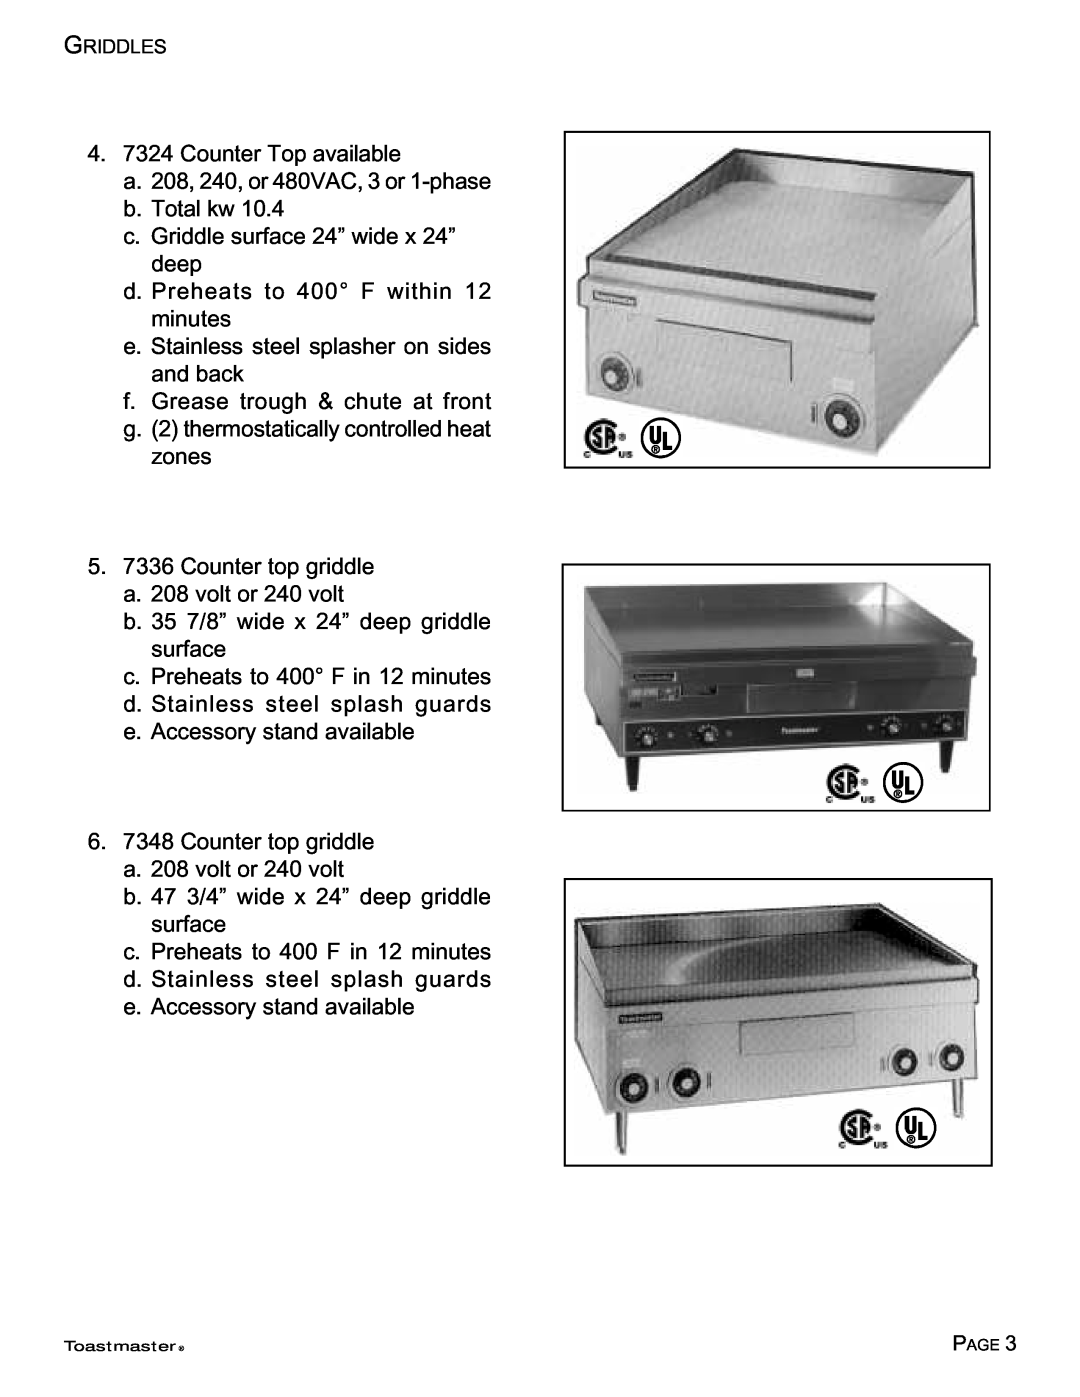 Toastmaster 7224, 7336, 7348, 7236 manual 4. 7324 Counter Top available a. 208, 240, or 480VAC, 3 or 1-phase 